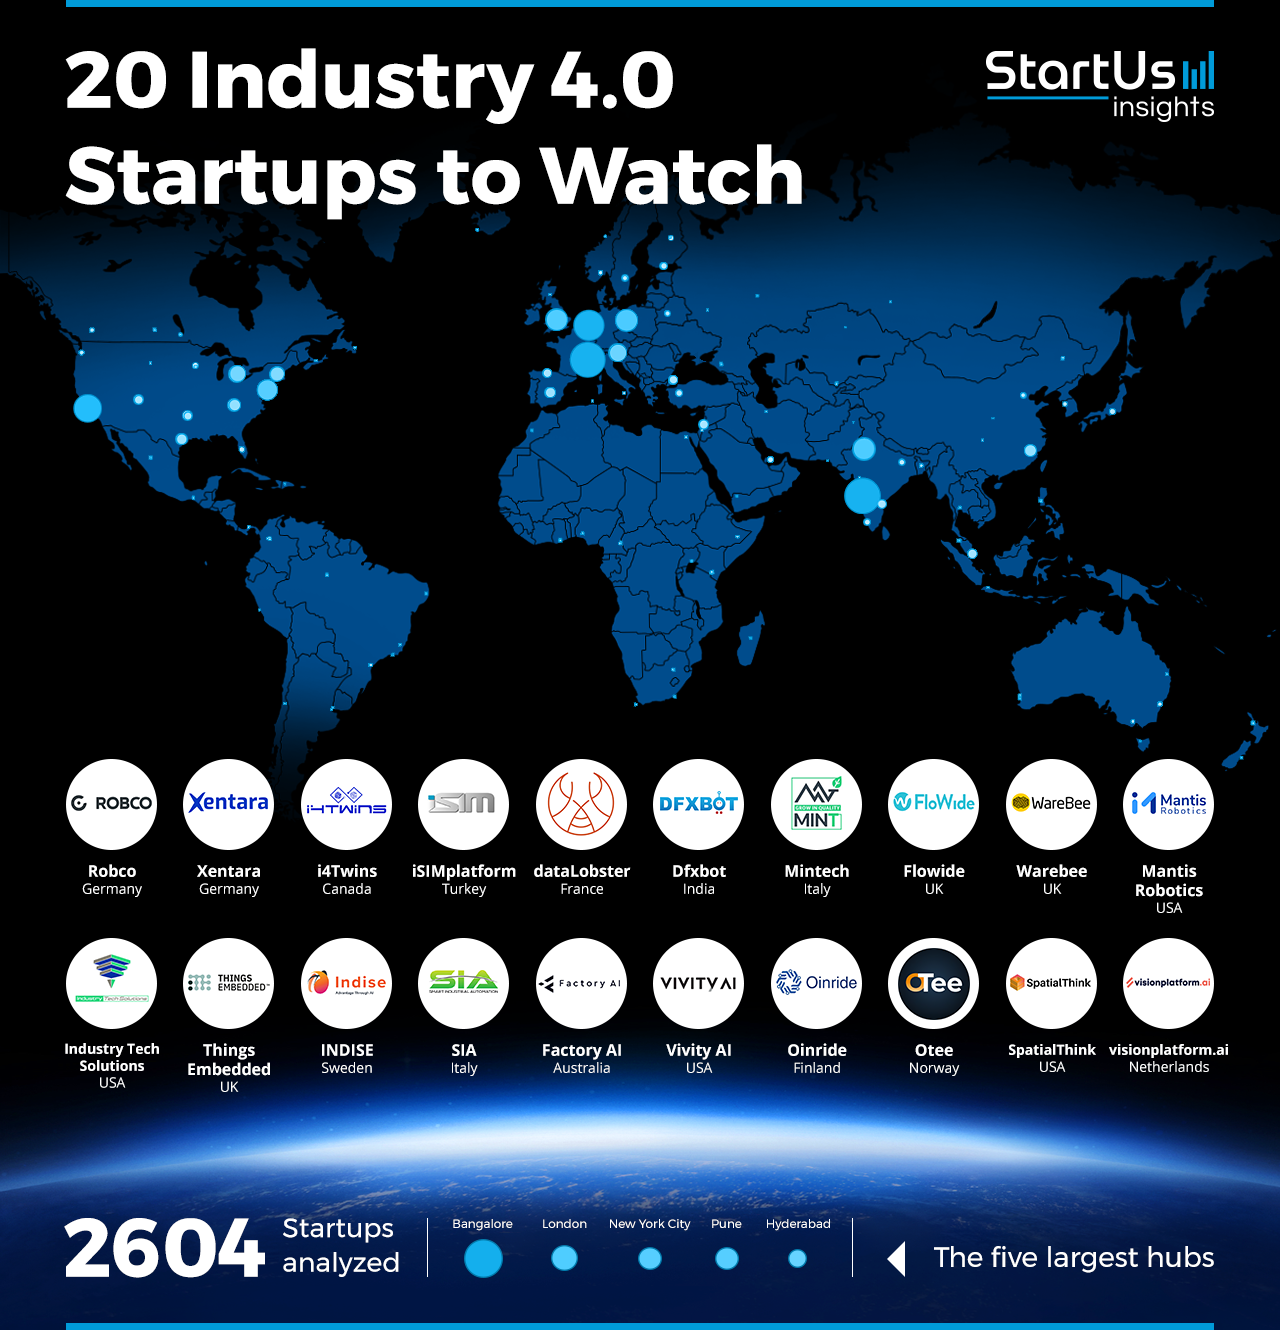 Industry-4.0-Startups-to-Watch-Heat-Map-StartUs-Insights